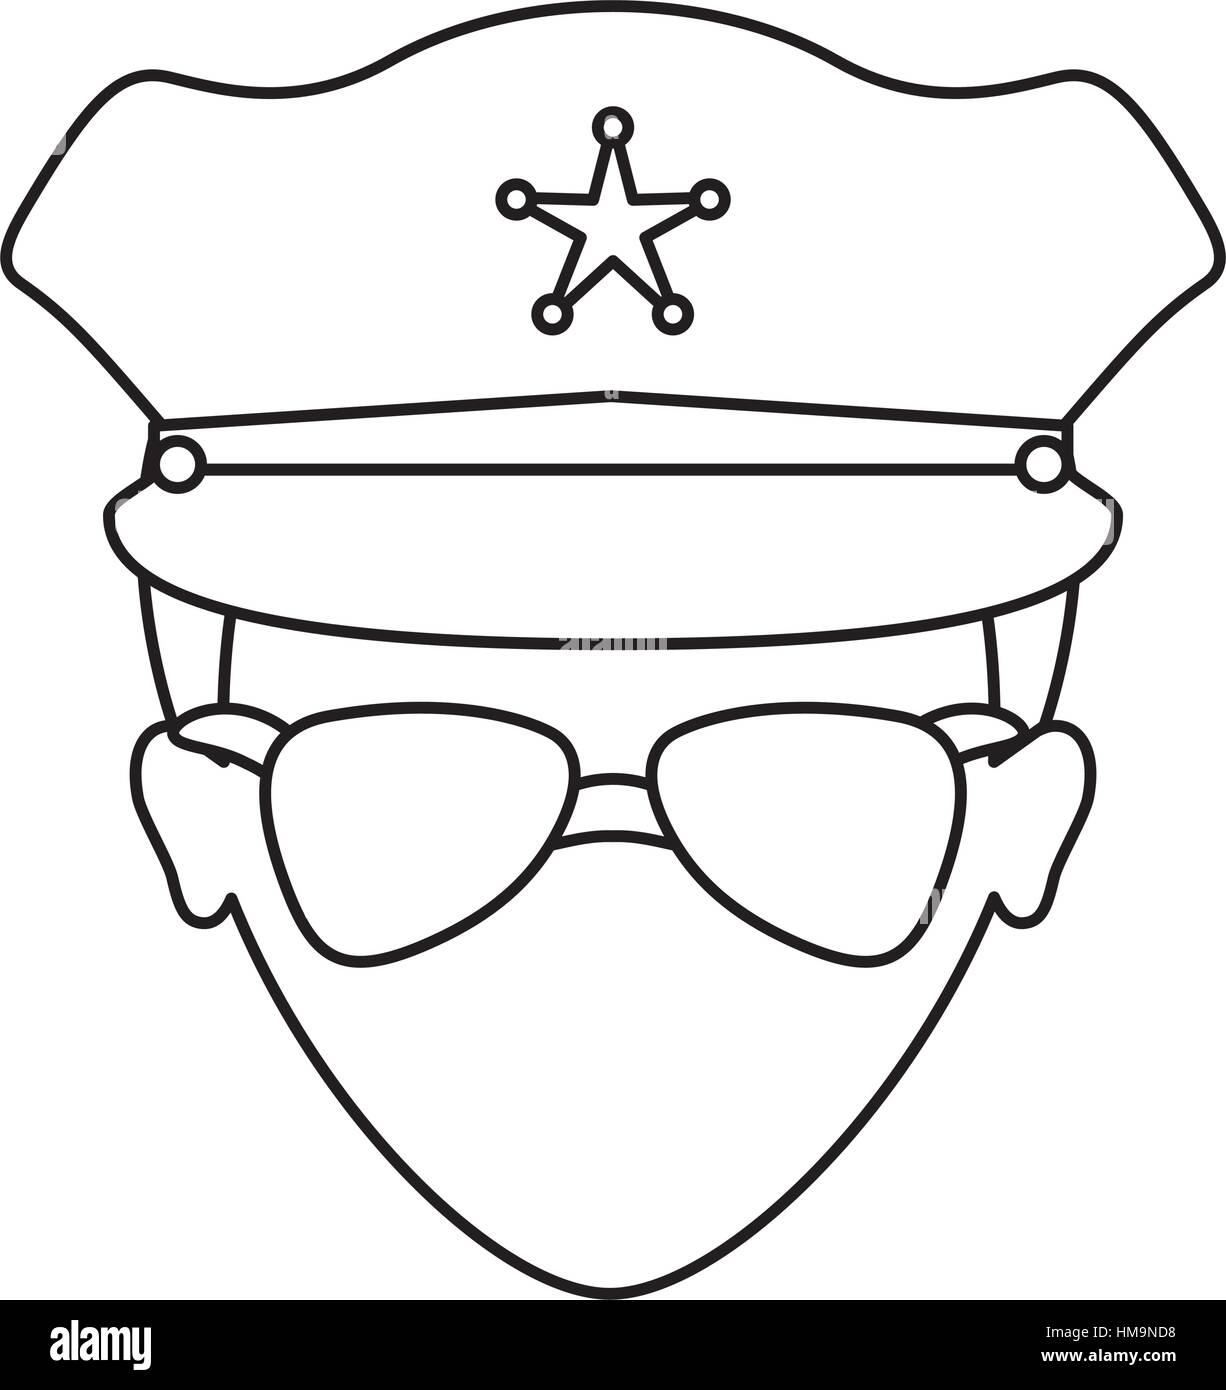 police officer icon image vector illustration design Stock Vector